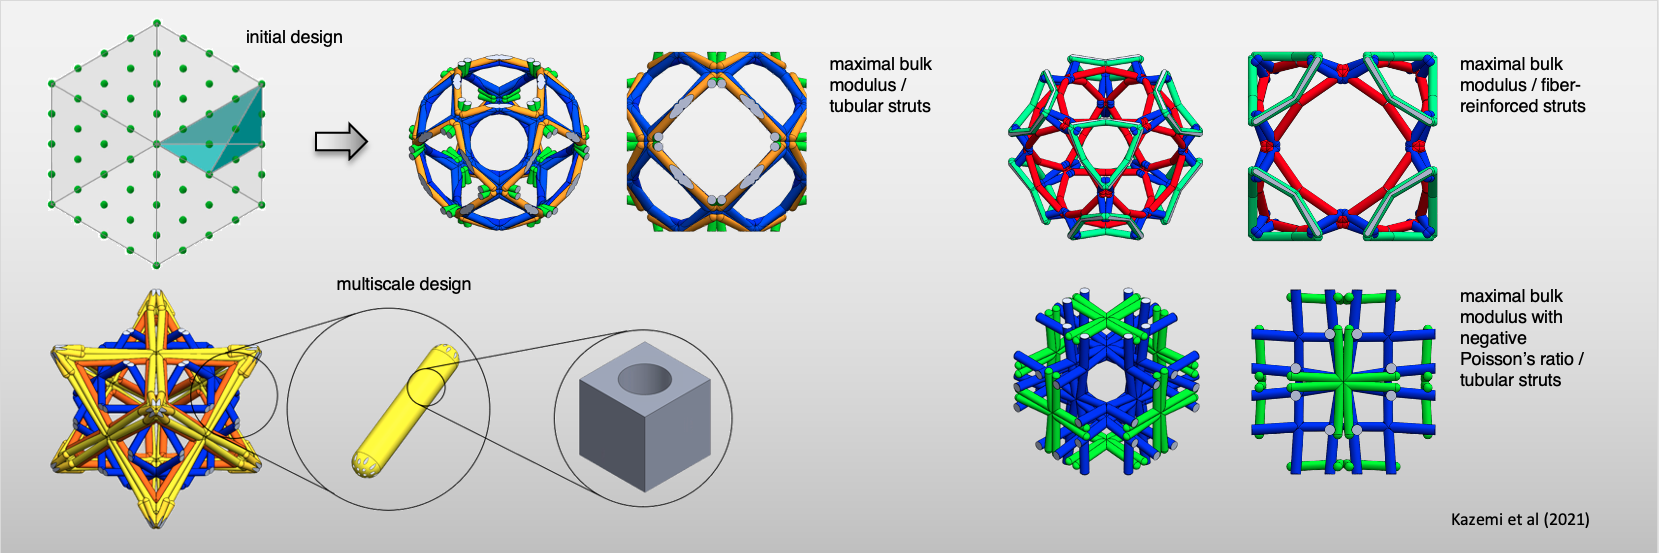 This slide shows examples of architected truss lattices with hollow or fiber-reinforced struts